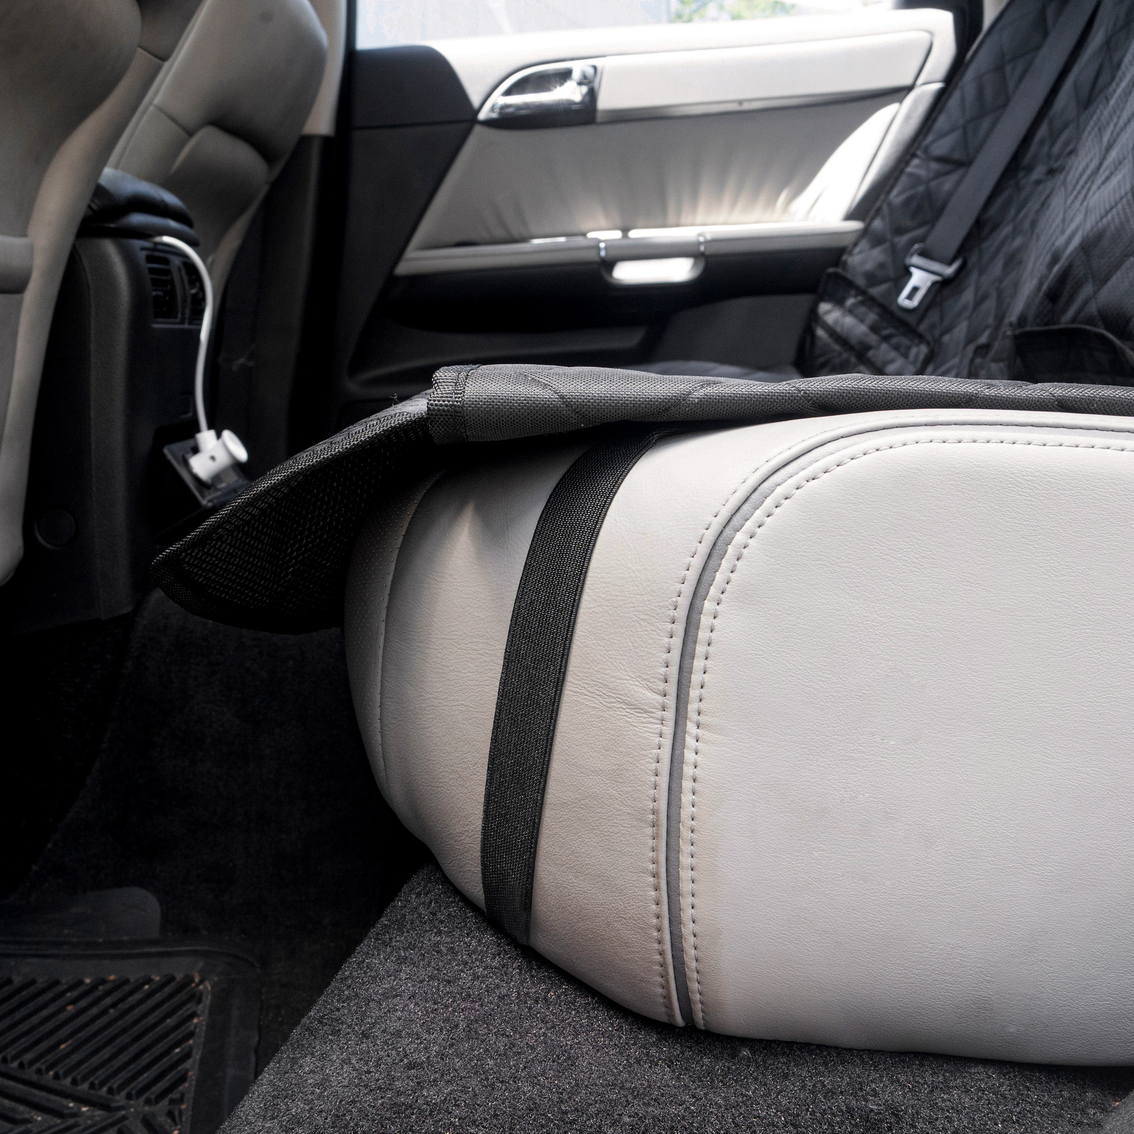 Wagan Road Ready Seat Protector, Large - Image 5 of 10